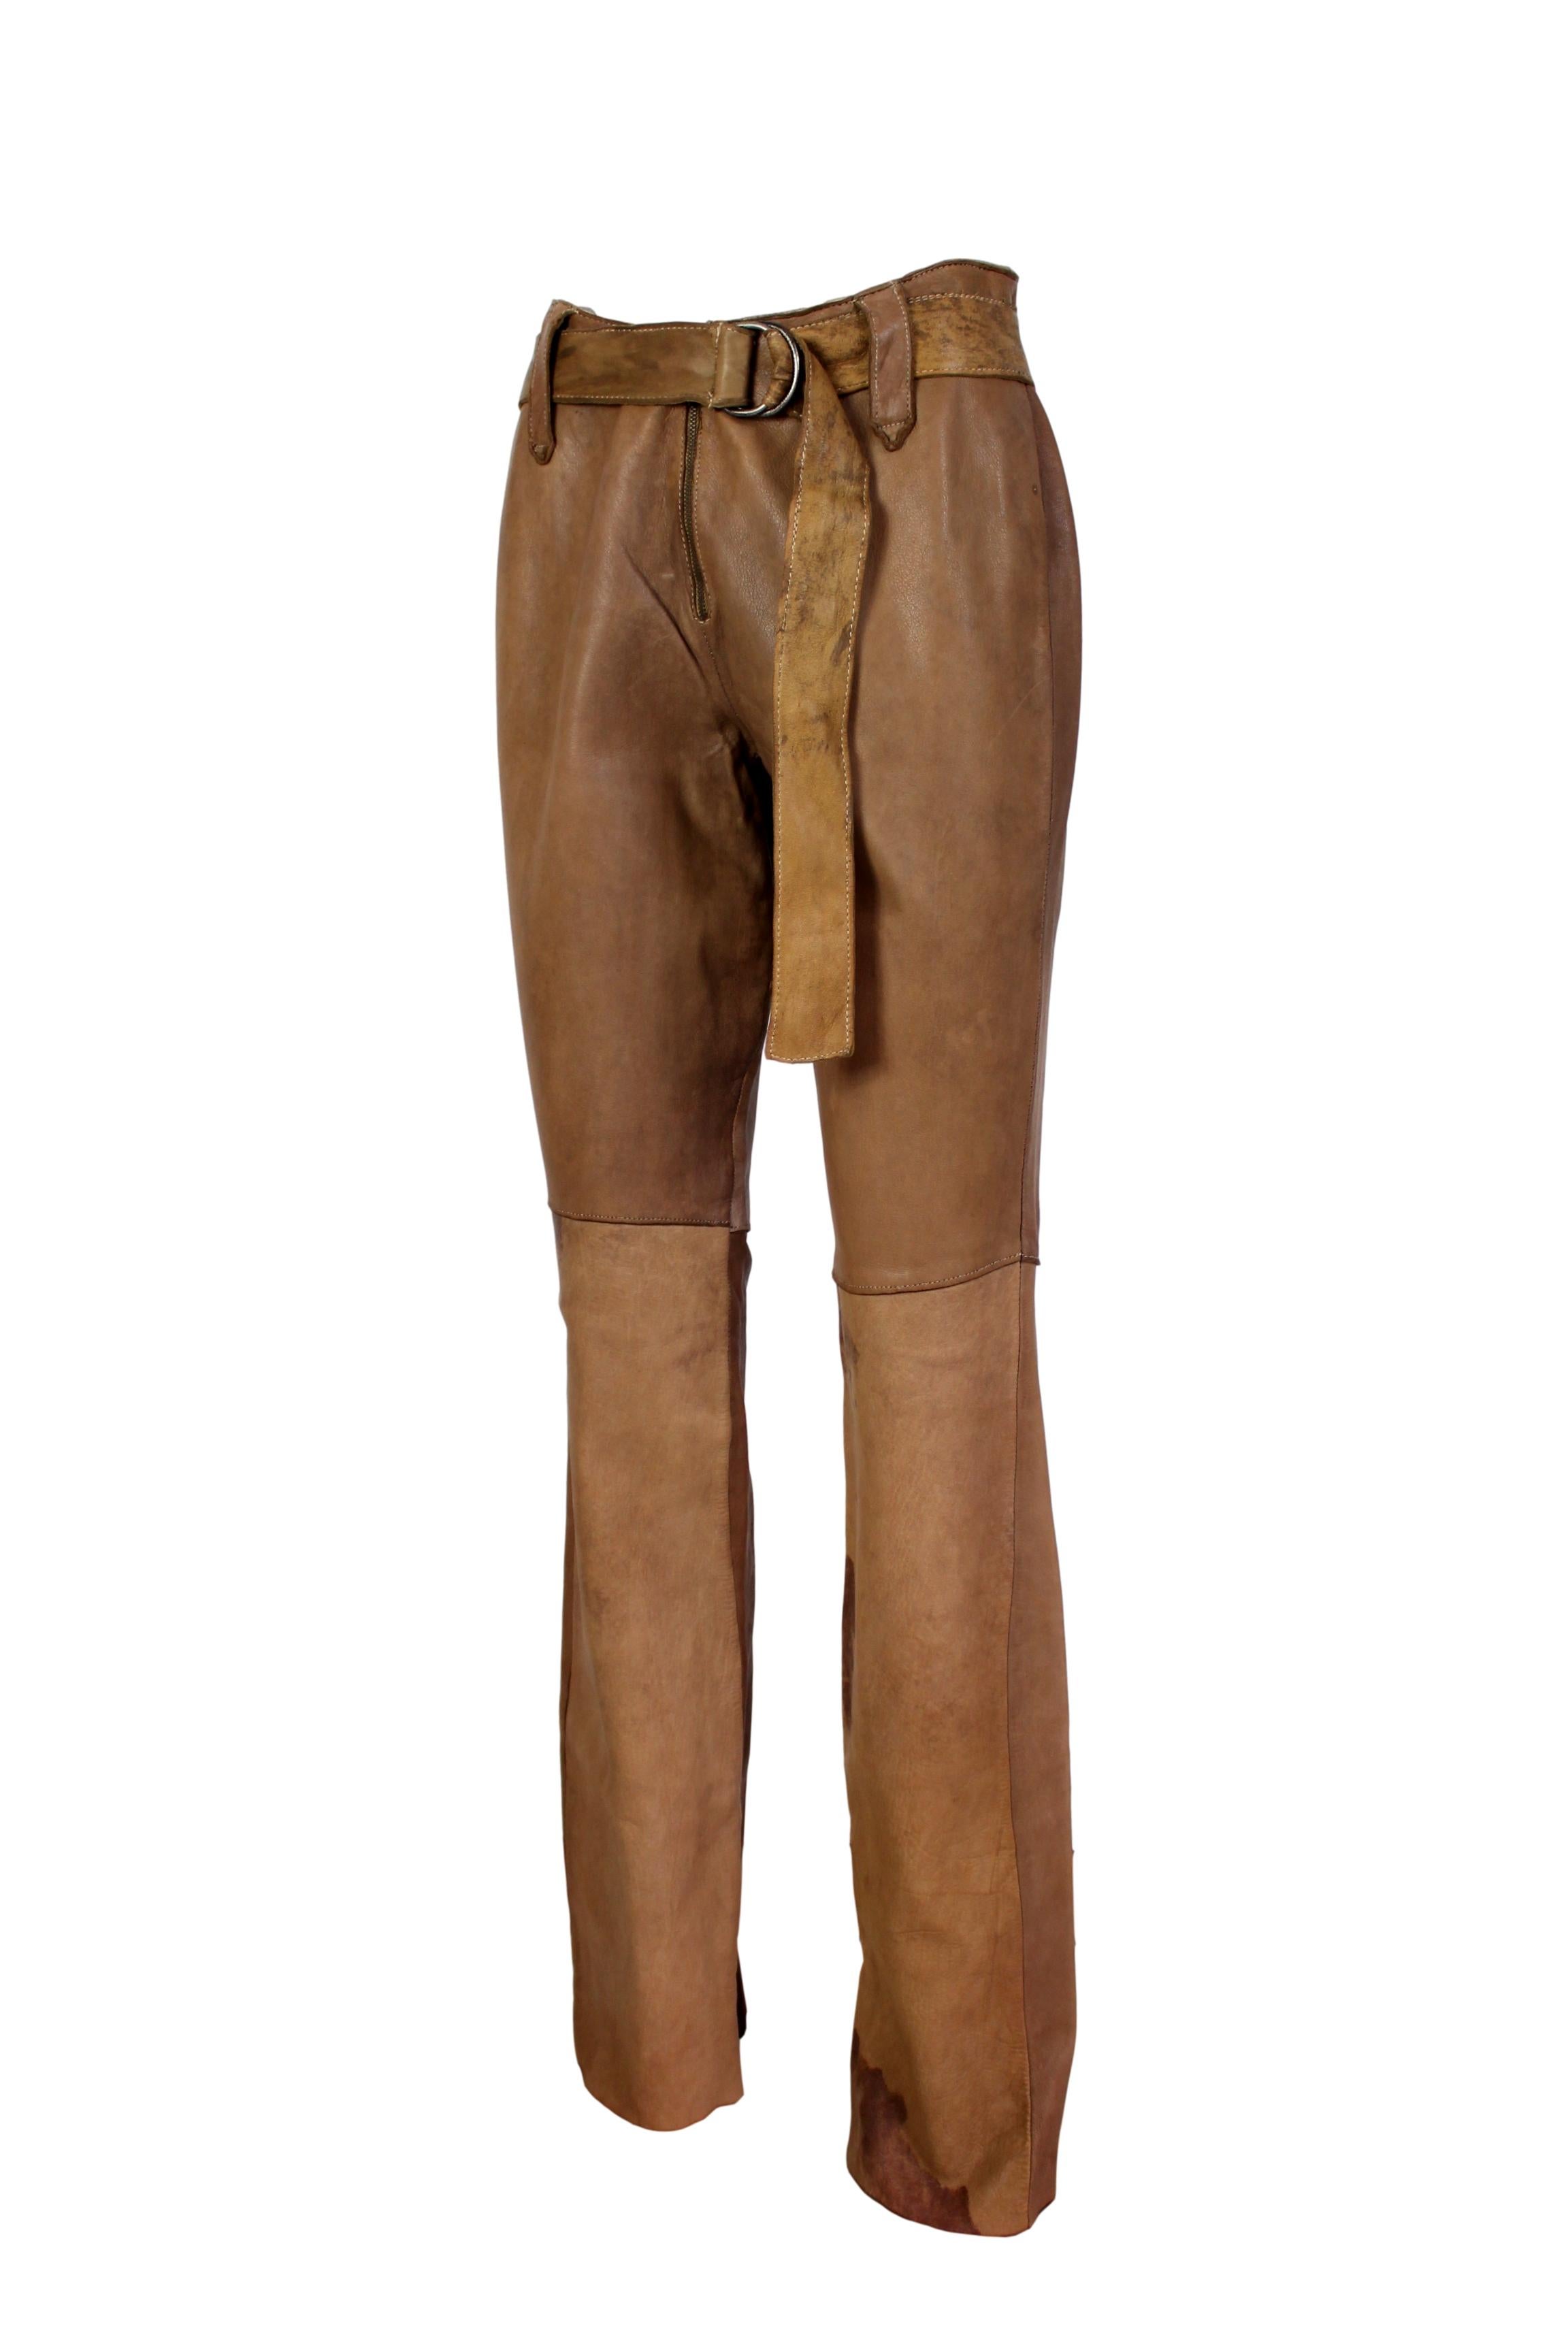 Vintage leather trousers Phorms Milano 80s women's. Biker-style trousers, 100% leather, color beige and brown. Straight leg, internally unlined. Zip closure and adjustable waist belt. Made in Italy. New without tag. The darker parts you see on the